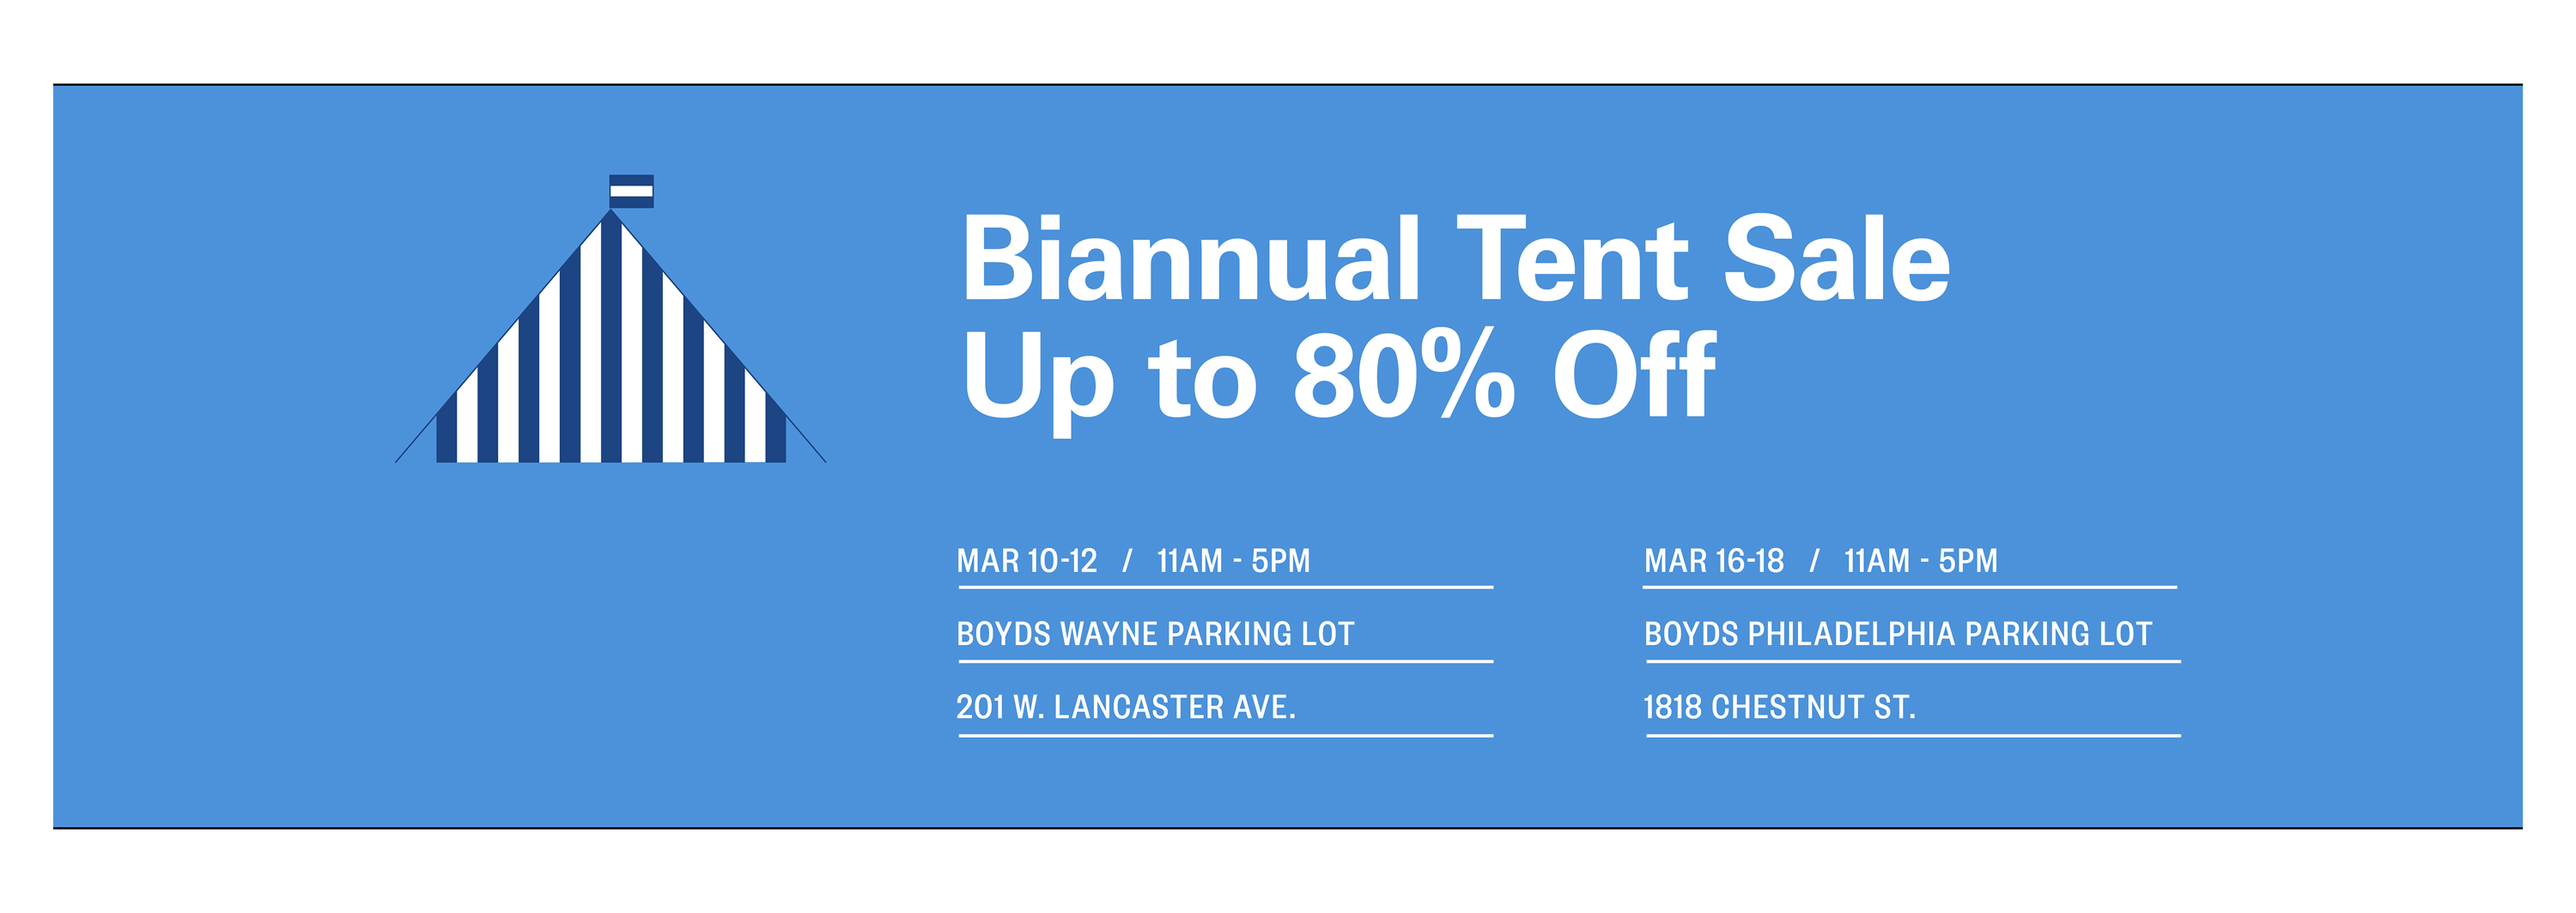 Tent Sale - Up to 80% Off